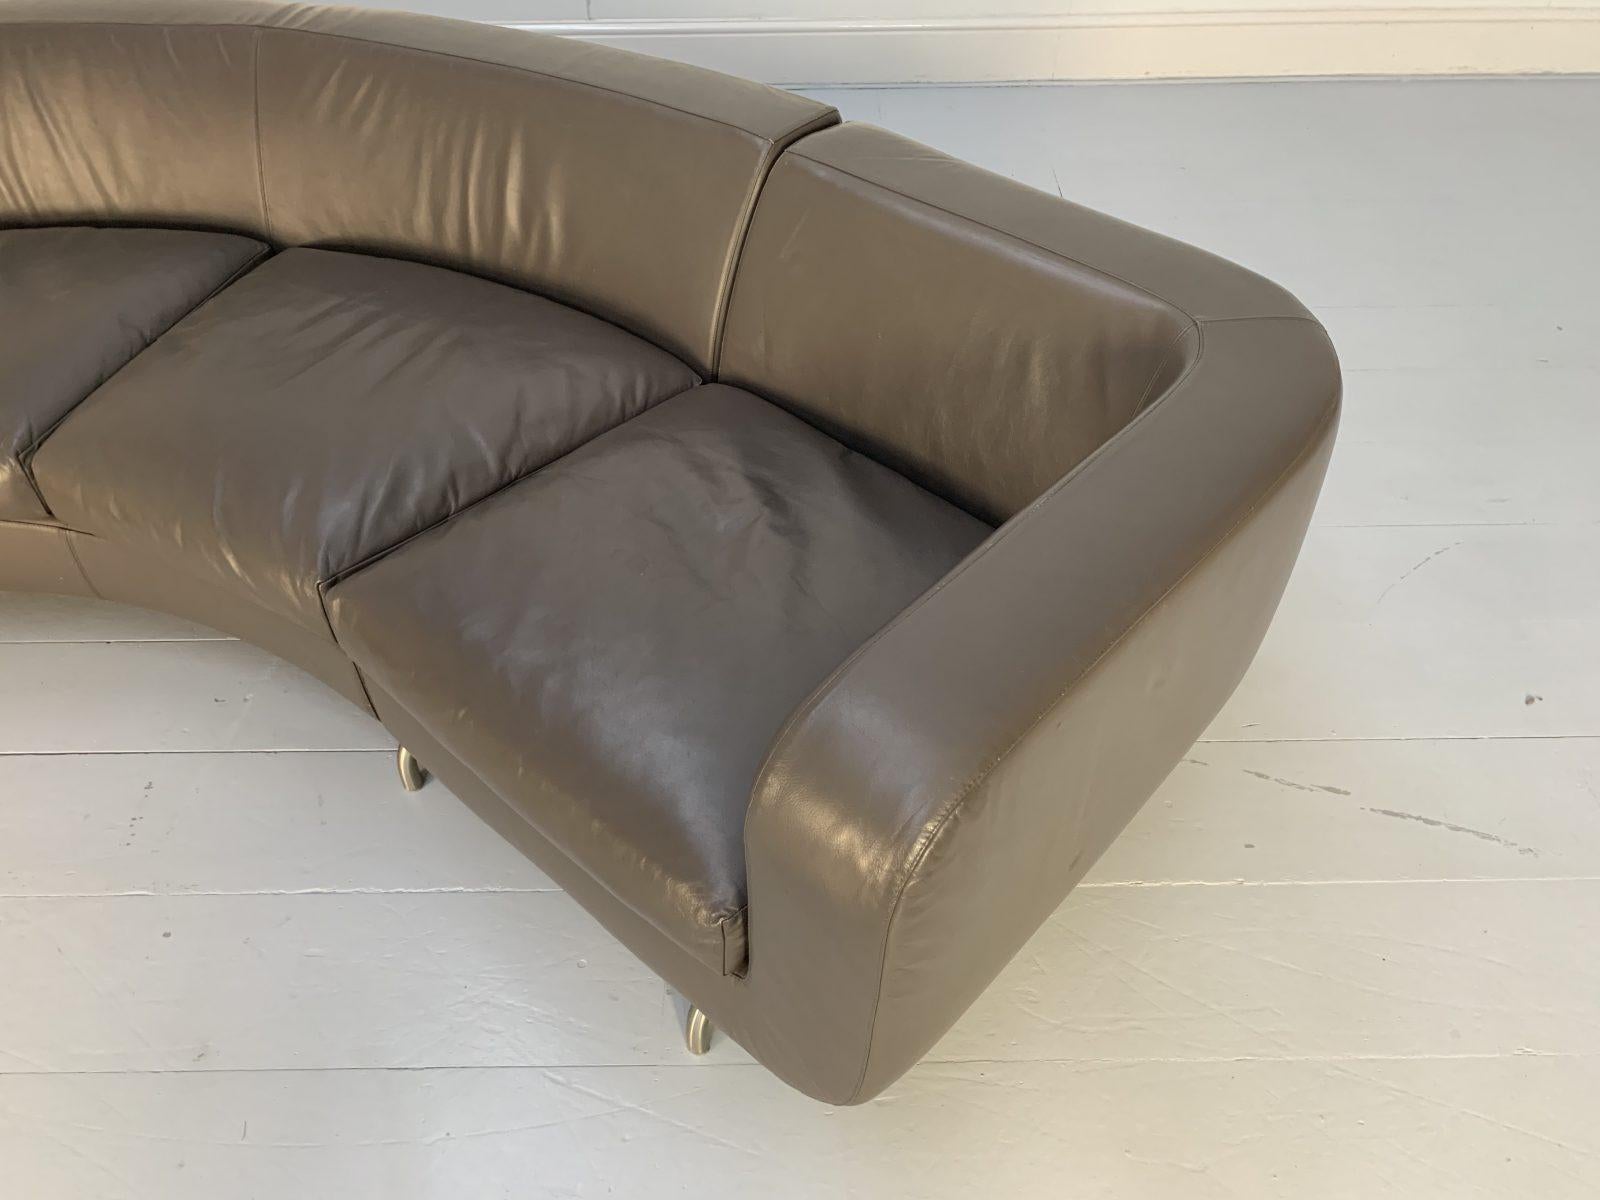 Rare Minotti “Dubuffet” Curved Sofa – in Dark Grey “Pelle” Leather For Sale 3